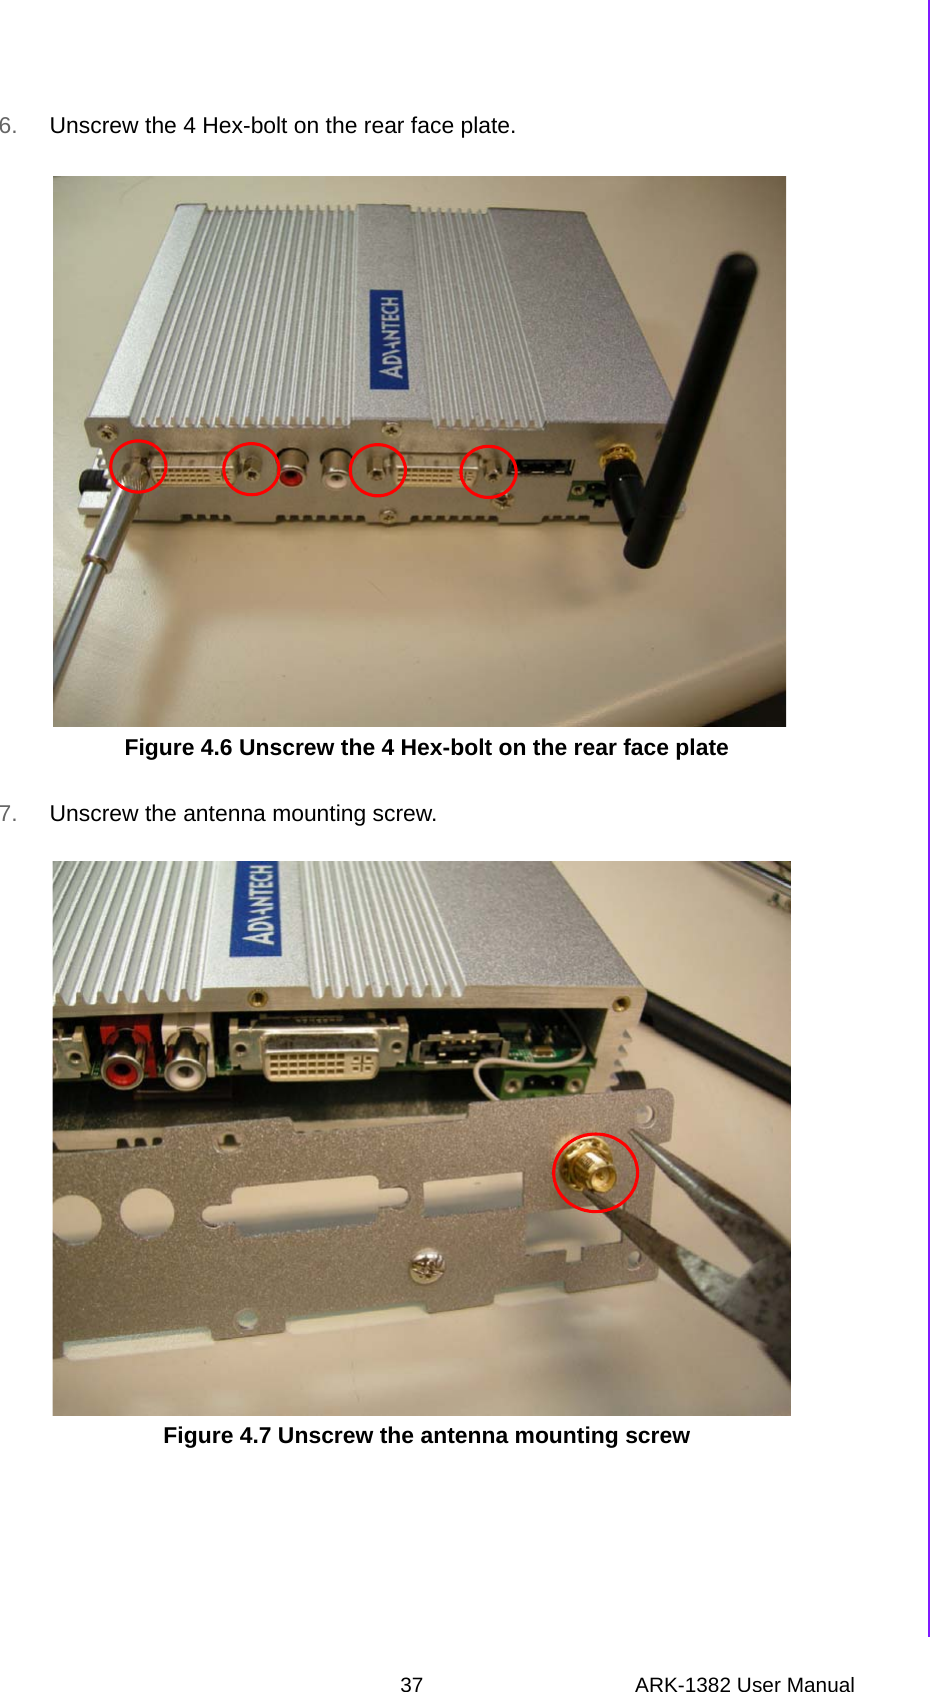 37 ARK-1382 User ManualChapter 4 Full Disassembly Procedure6. Unscrew the 4 Hex-bolt on the rear face plate.Figure 4.6 Unscrew the 4 Hex-bolt on the rear face plate7. Unscrew the antenna mounting screw.Figure 4.7 Unscrew the antenna mounting screw 